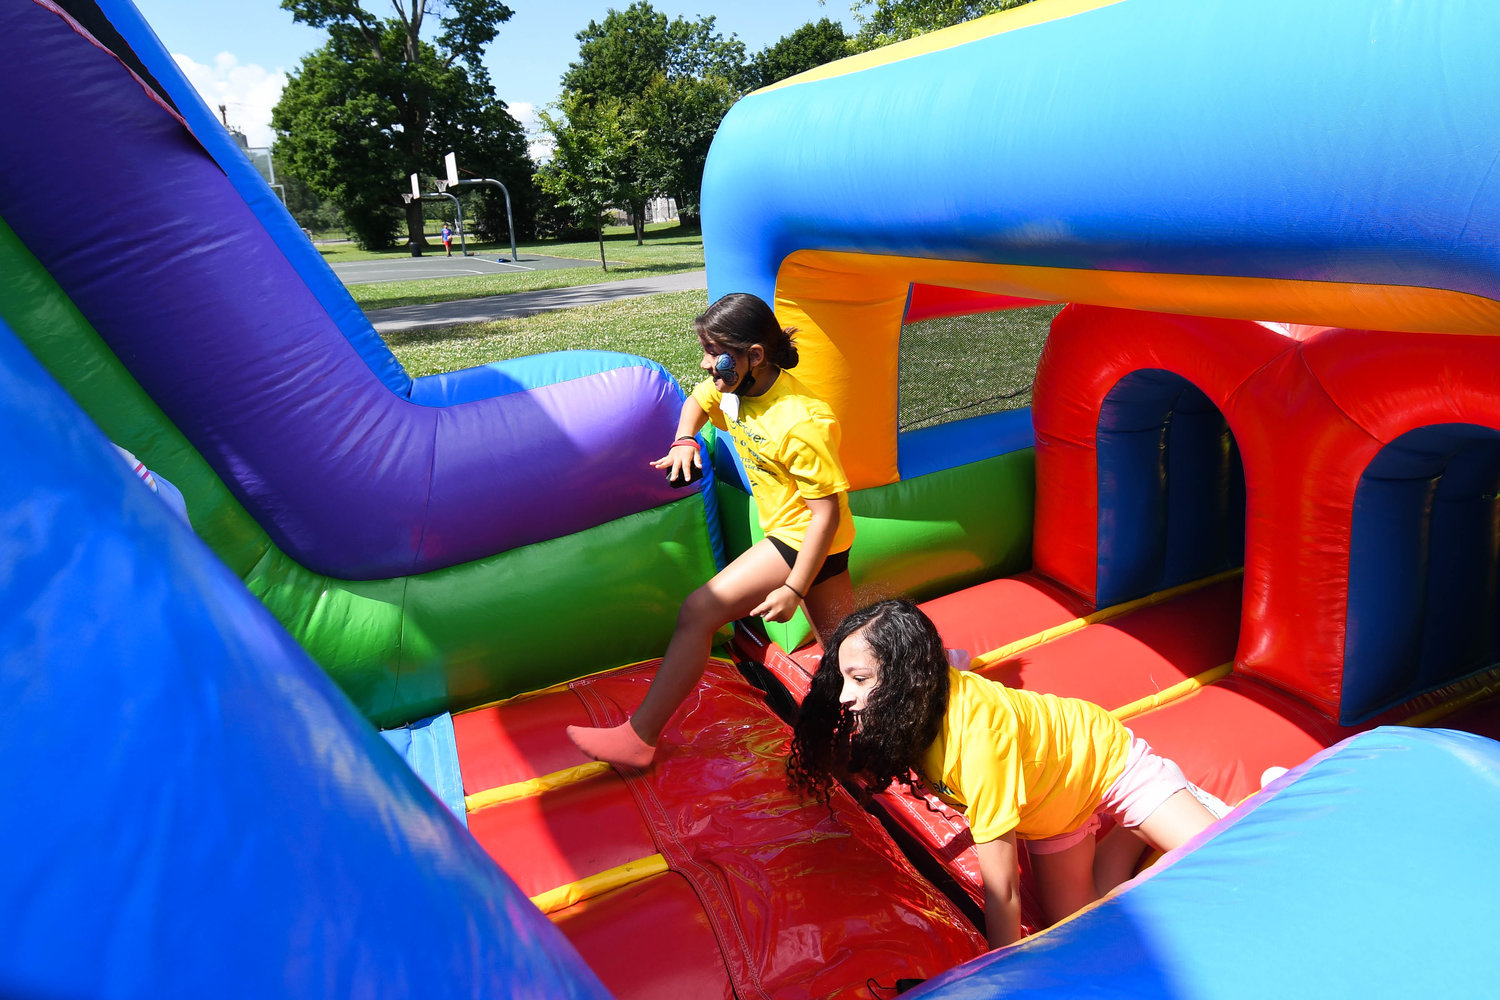 Camila Santana and Michaela Harrington run through an inflatable obstacle course during the Boilermaker Youth Olympics on Thursday at T.R. Proctor Park in Utica.